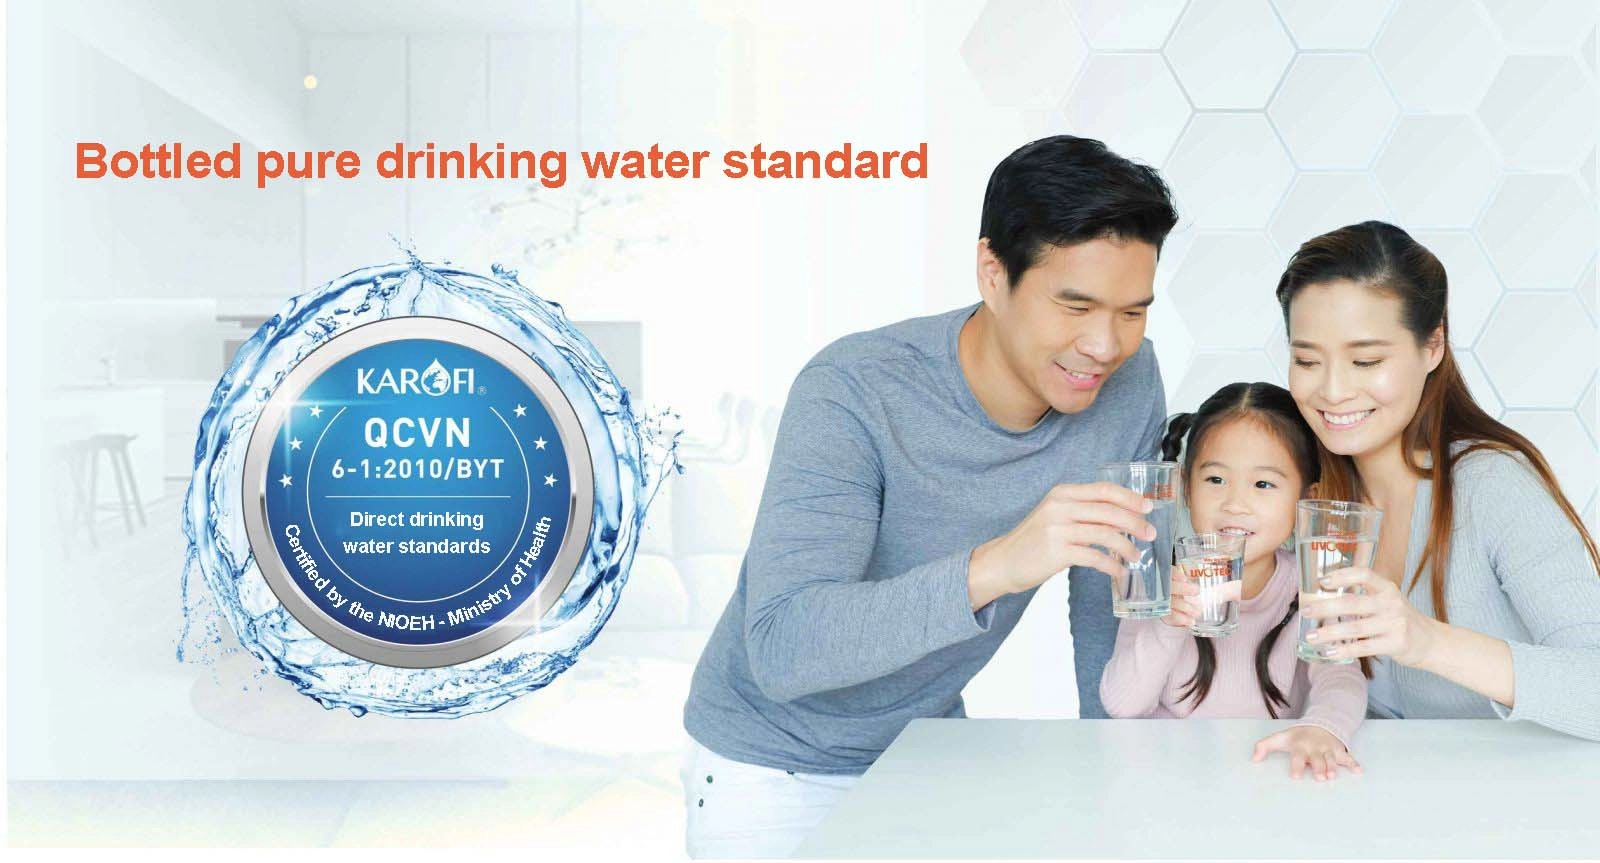 Pure drinking water that meets national standards QCVN 6-1:2010/MOH